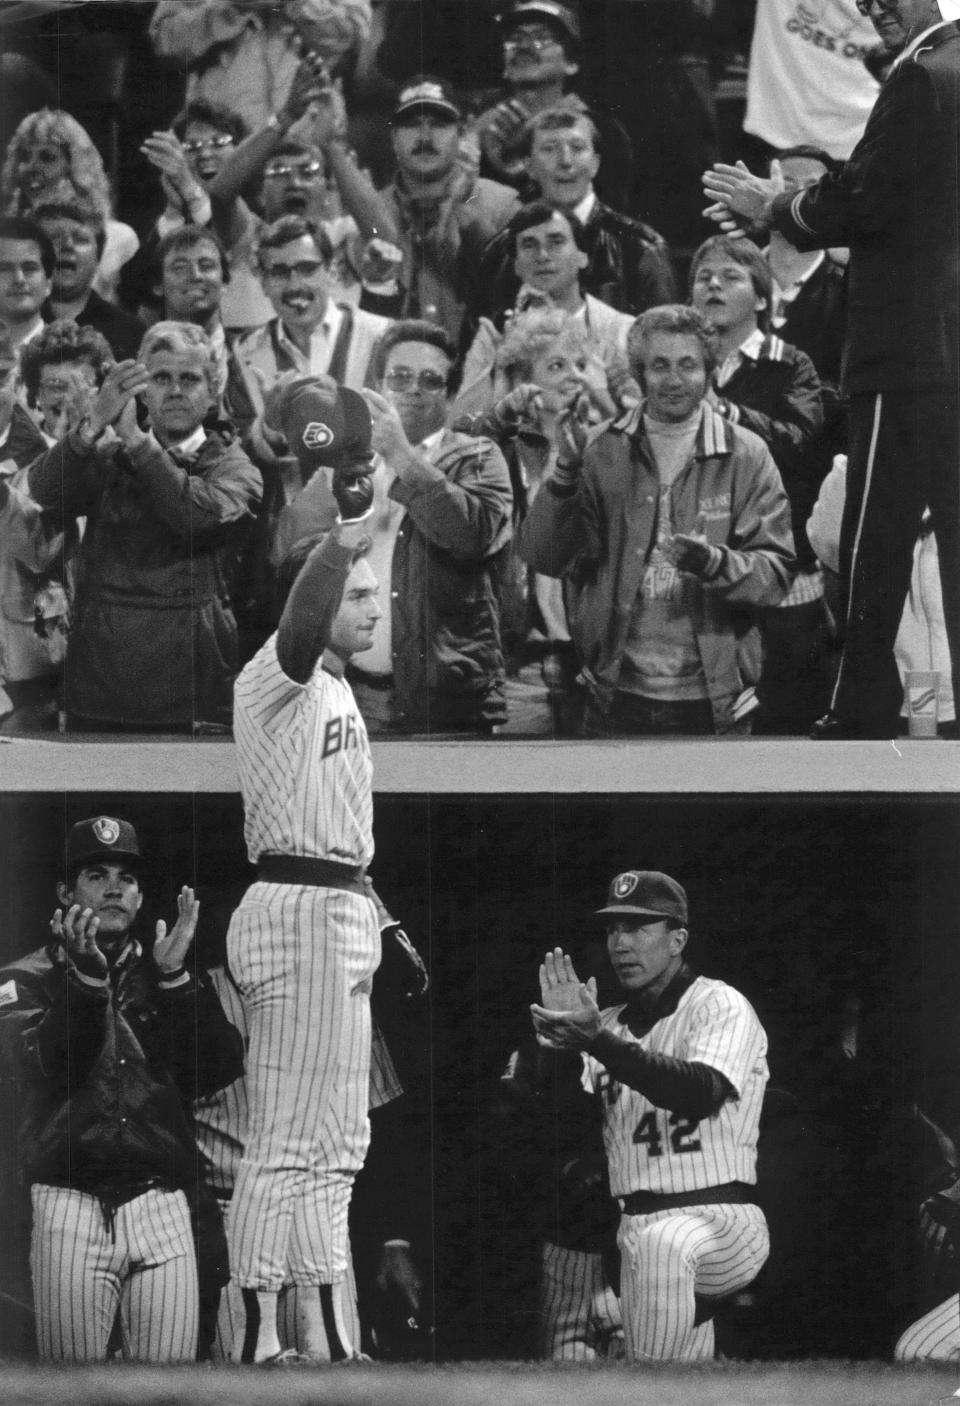 Paul Molitor acknowledges the ovation of the crowd in 1987 after his hitting streak came to a halt at 39 games as the Milwaukee Brewers beat Cleveland, 1-0, with a run in the 10th inning.